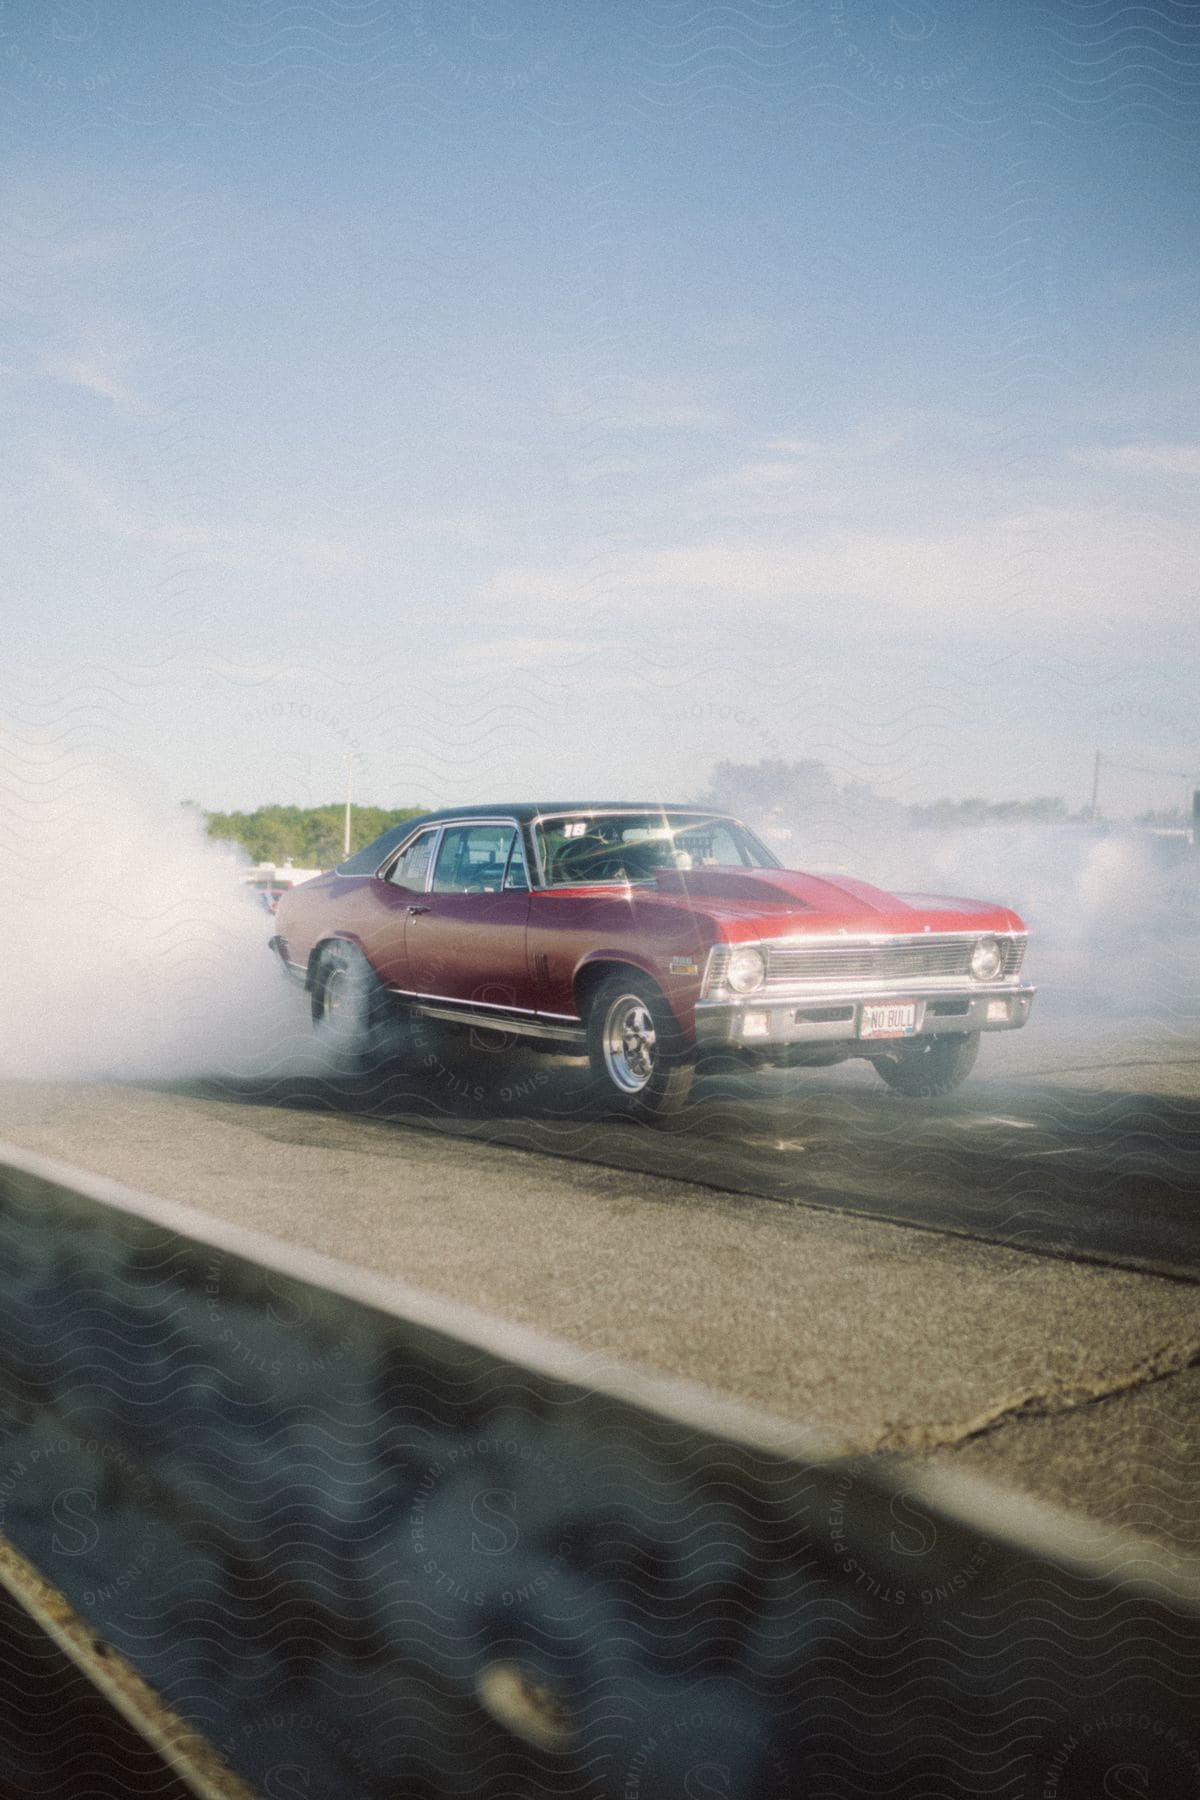 A candy apple red Chevy Nova burns out on a drag strip, spewing smoke from its rear tires.